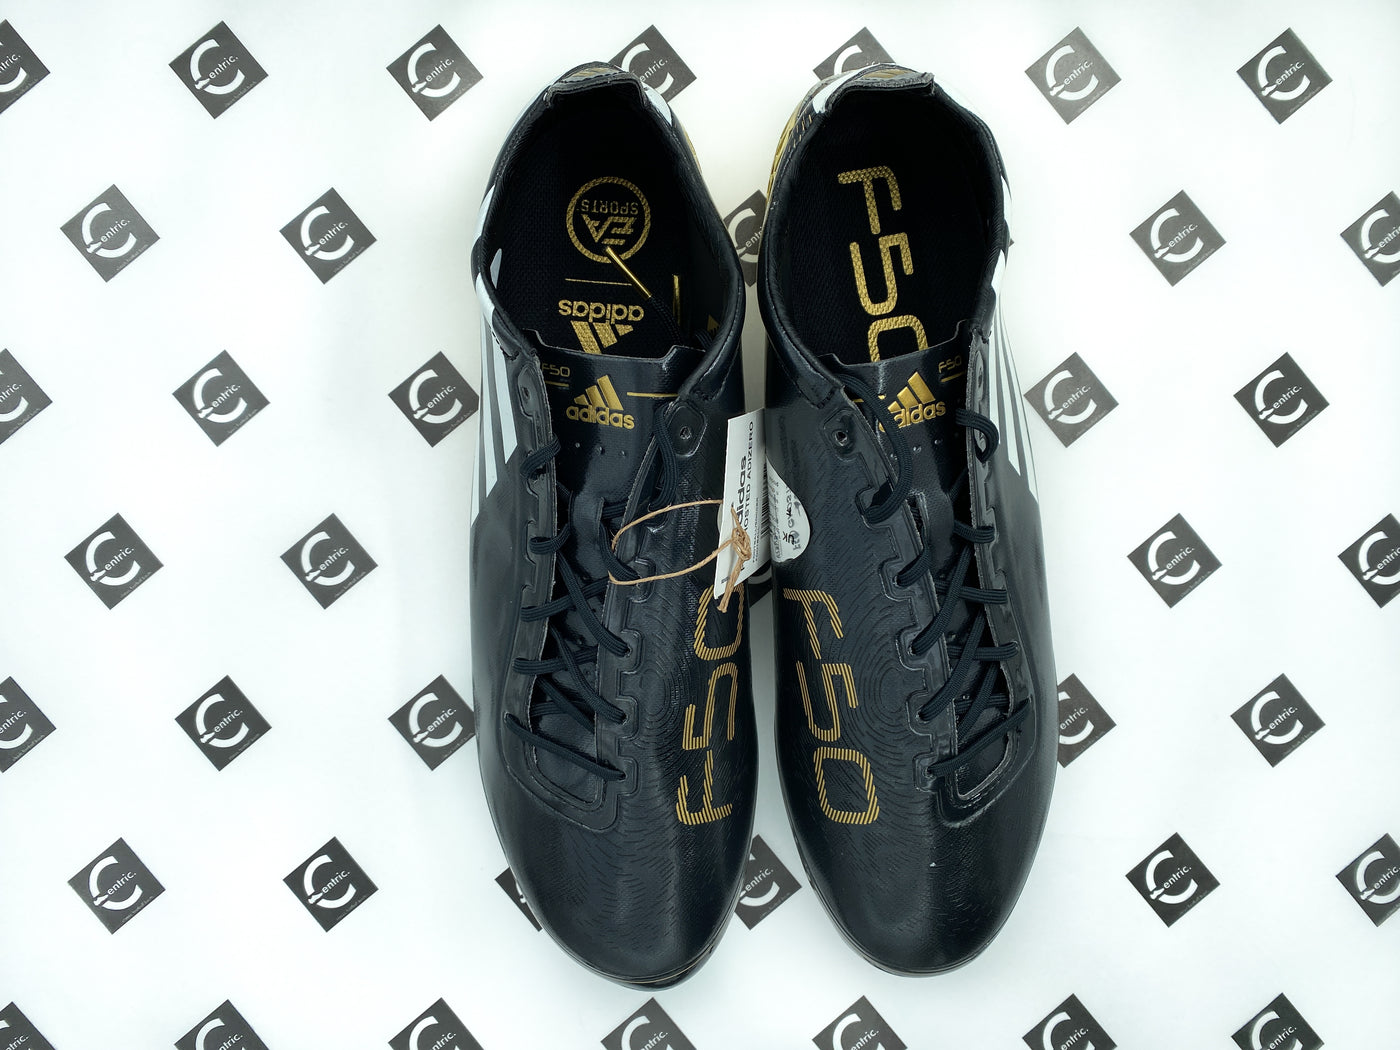 Adidas F50 Ghosted X EA Sports Limited Edition FG - Bootscentric